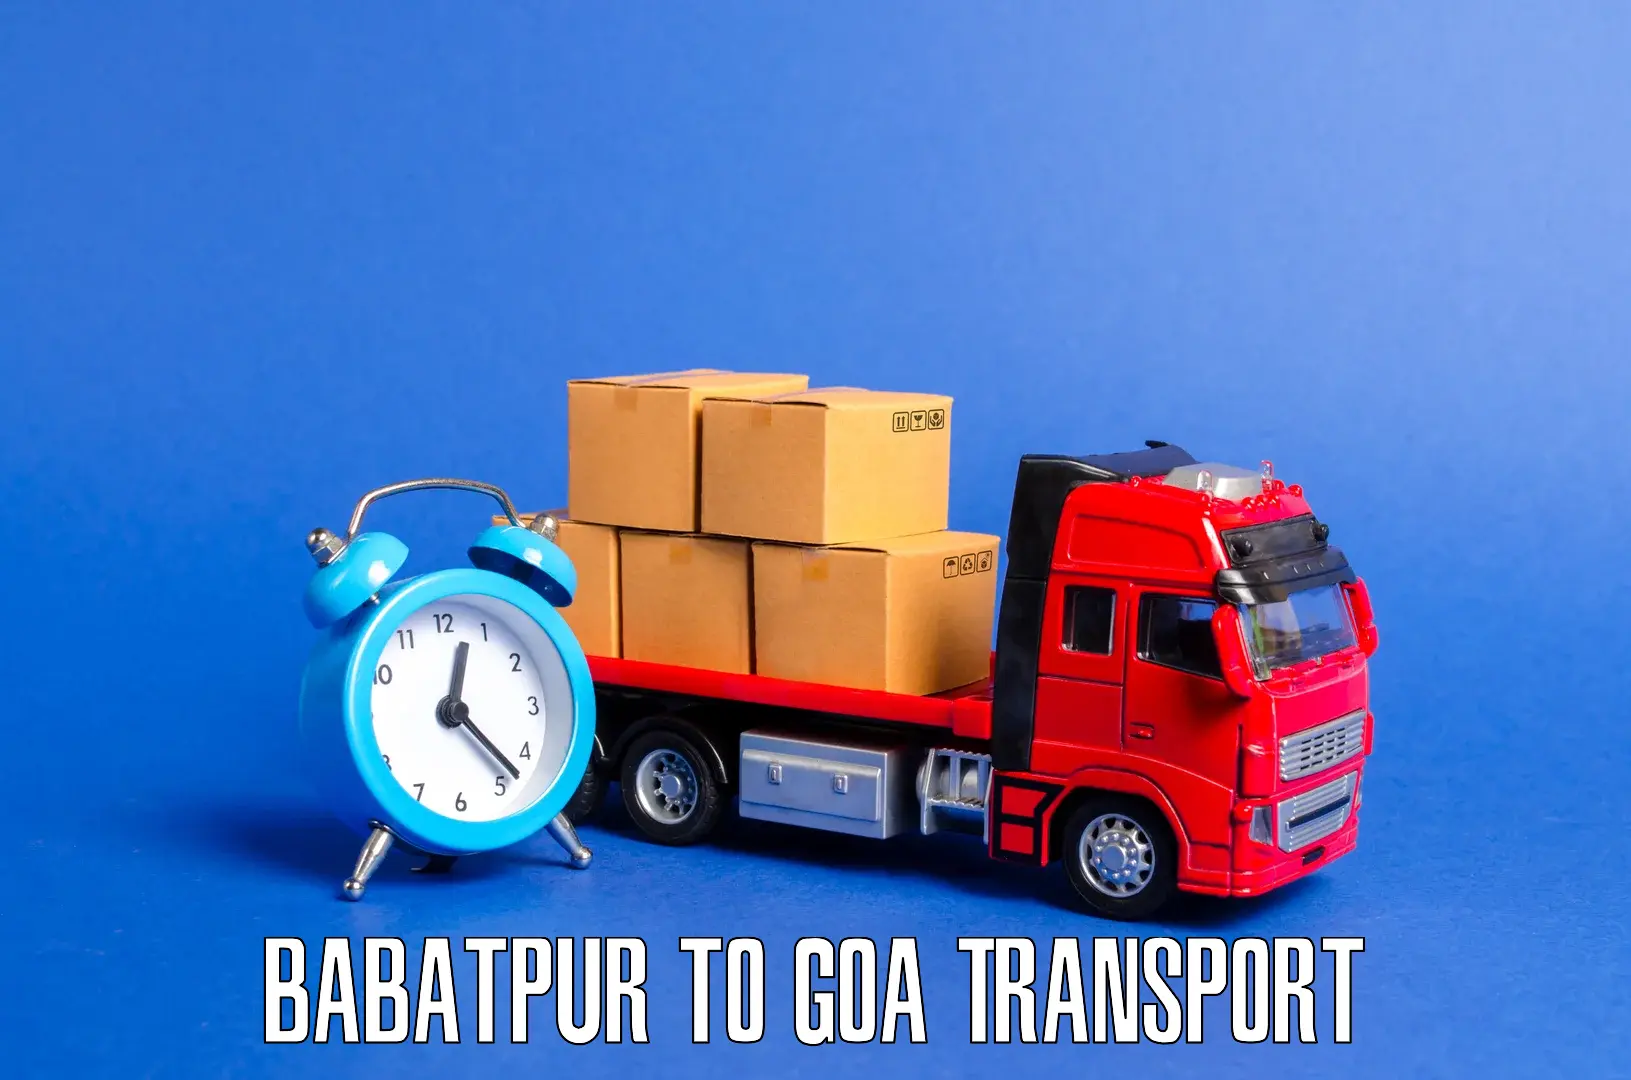 Nearby transport service in Babatpur to Margao